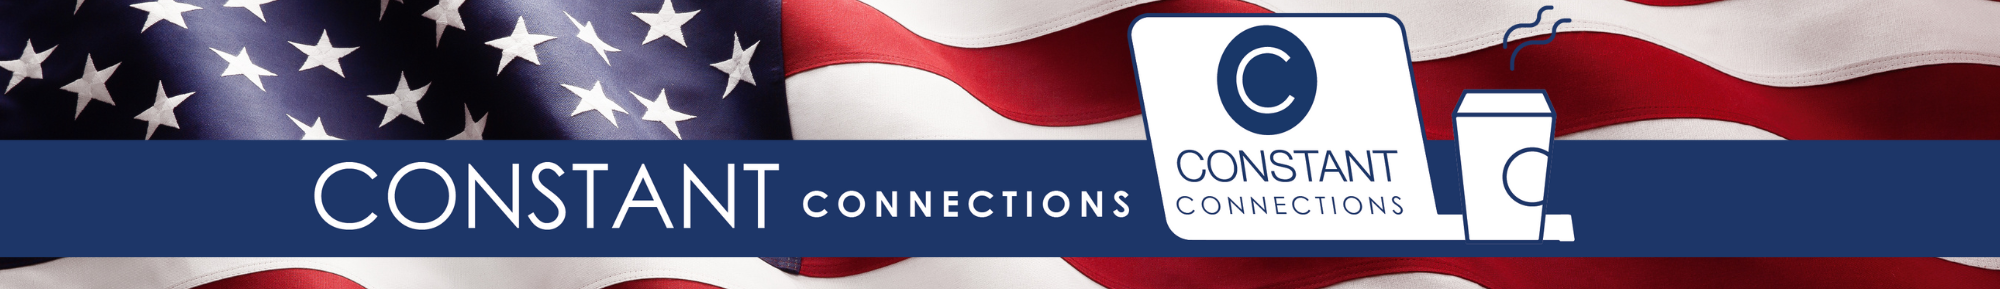 CONSTANT Connections banner with American flag background